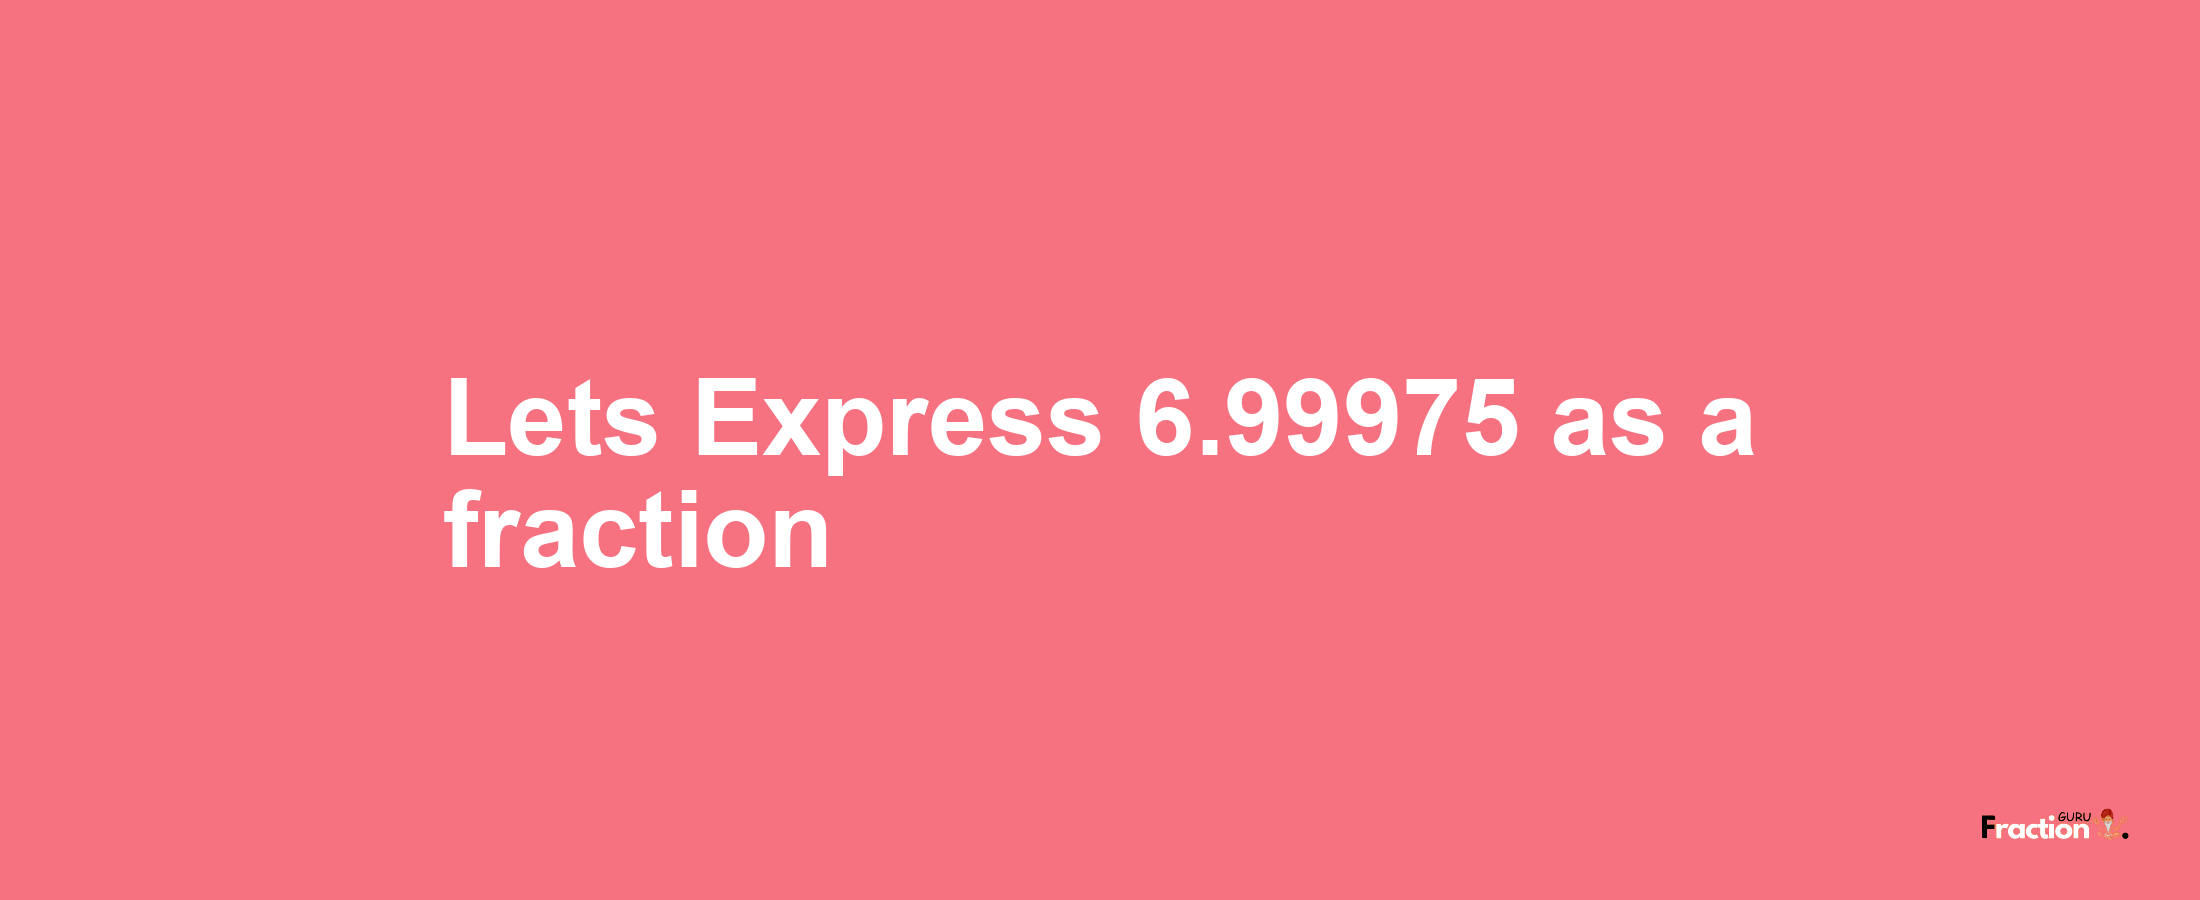 Lets Express 6.99975 as afraction